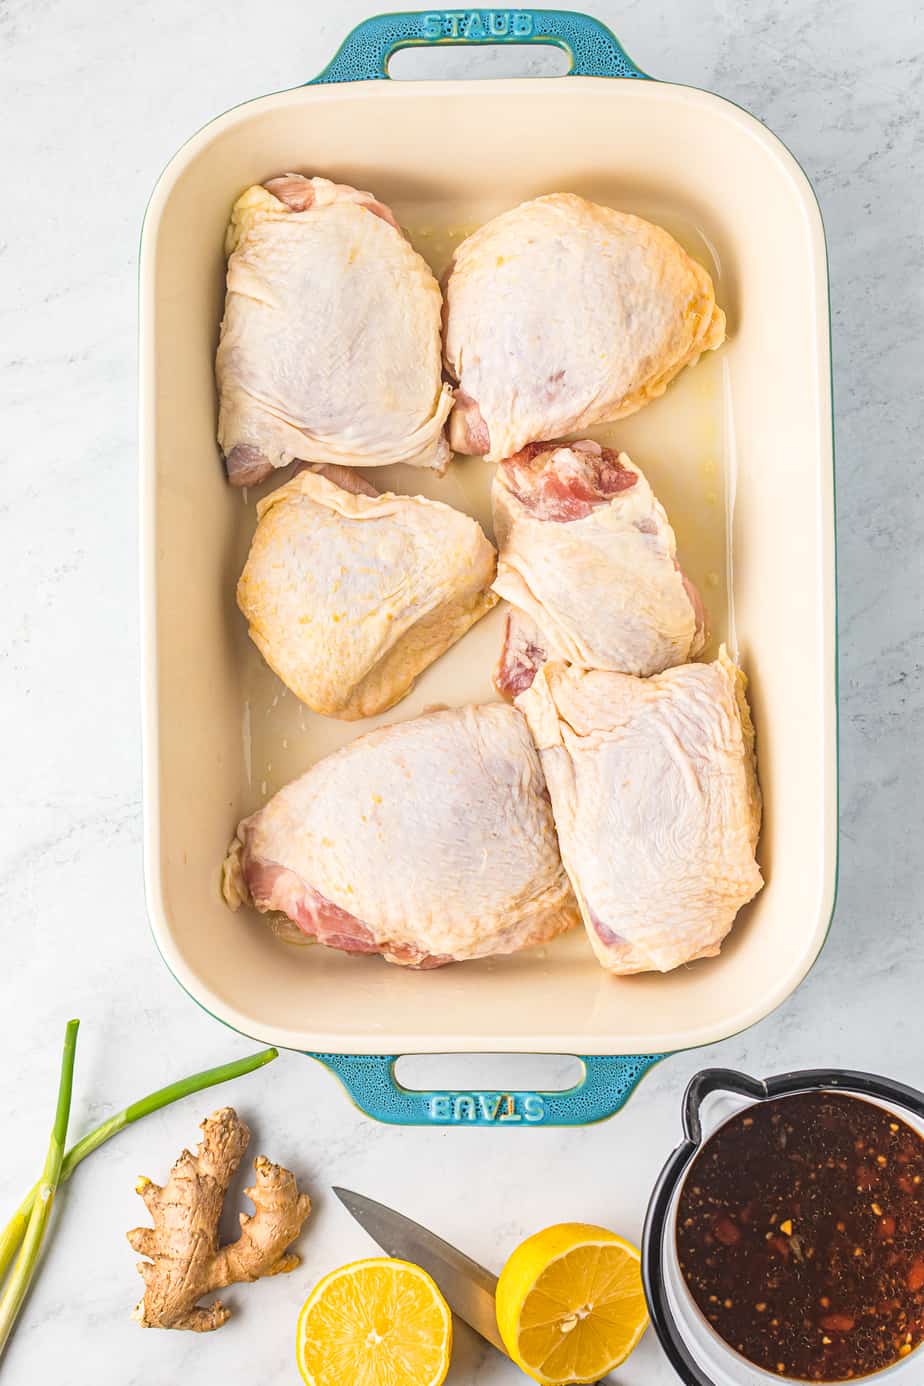 raw bone in chicken thighs lined up in a baking dish with marinade and other ingredients nearby on the table from overhead